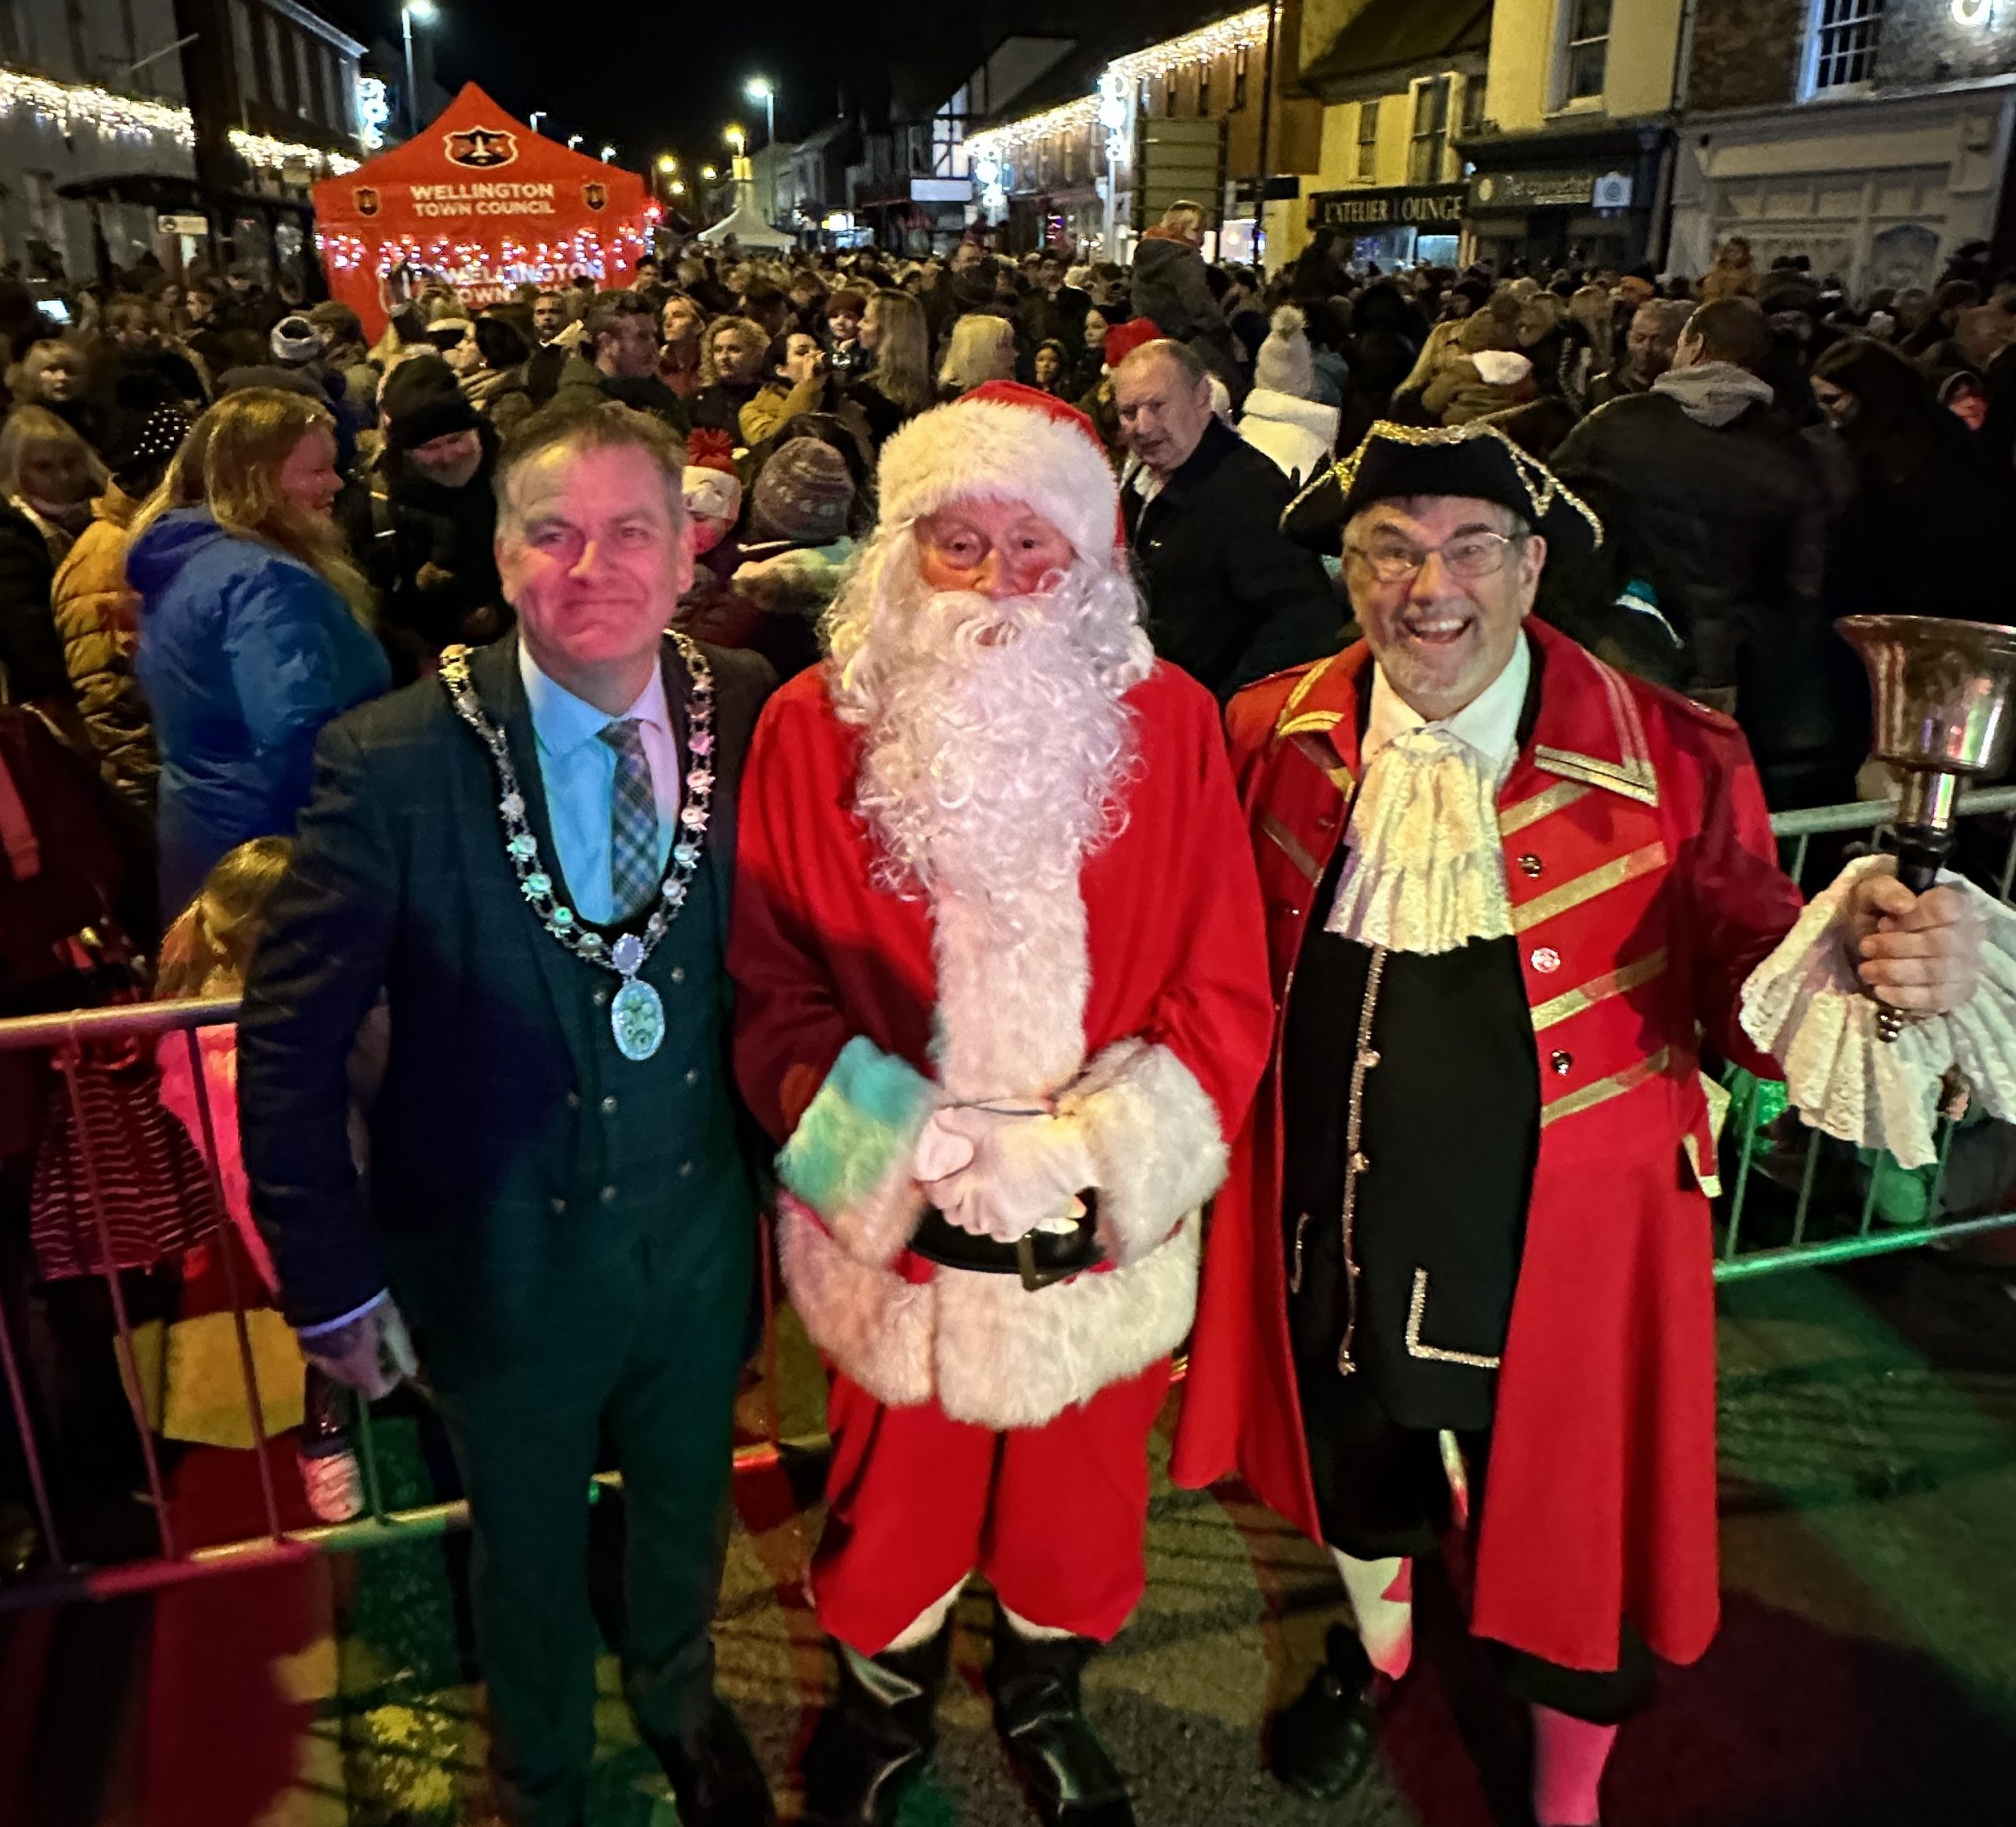 Mayor Marcus Barr, Santa Claus, and the Town Crier stand in front of a large crowd